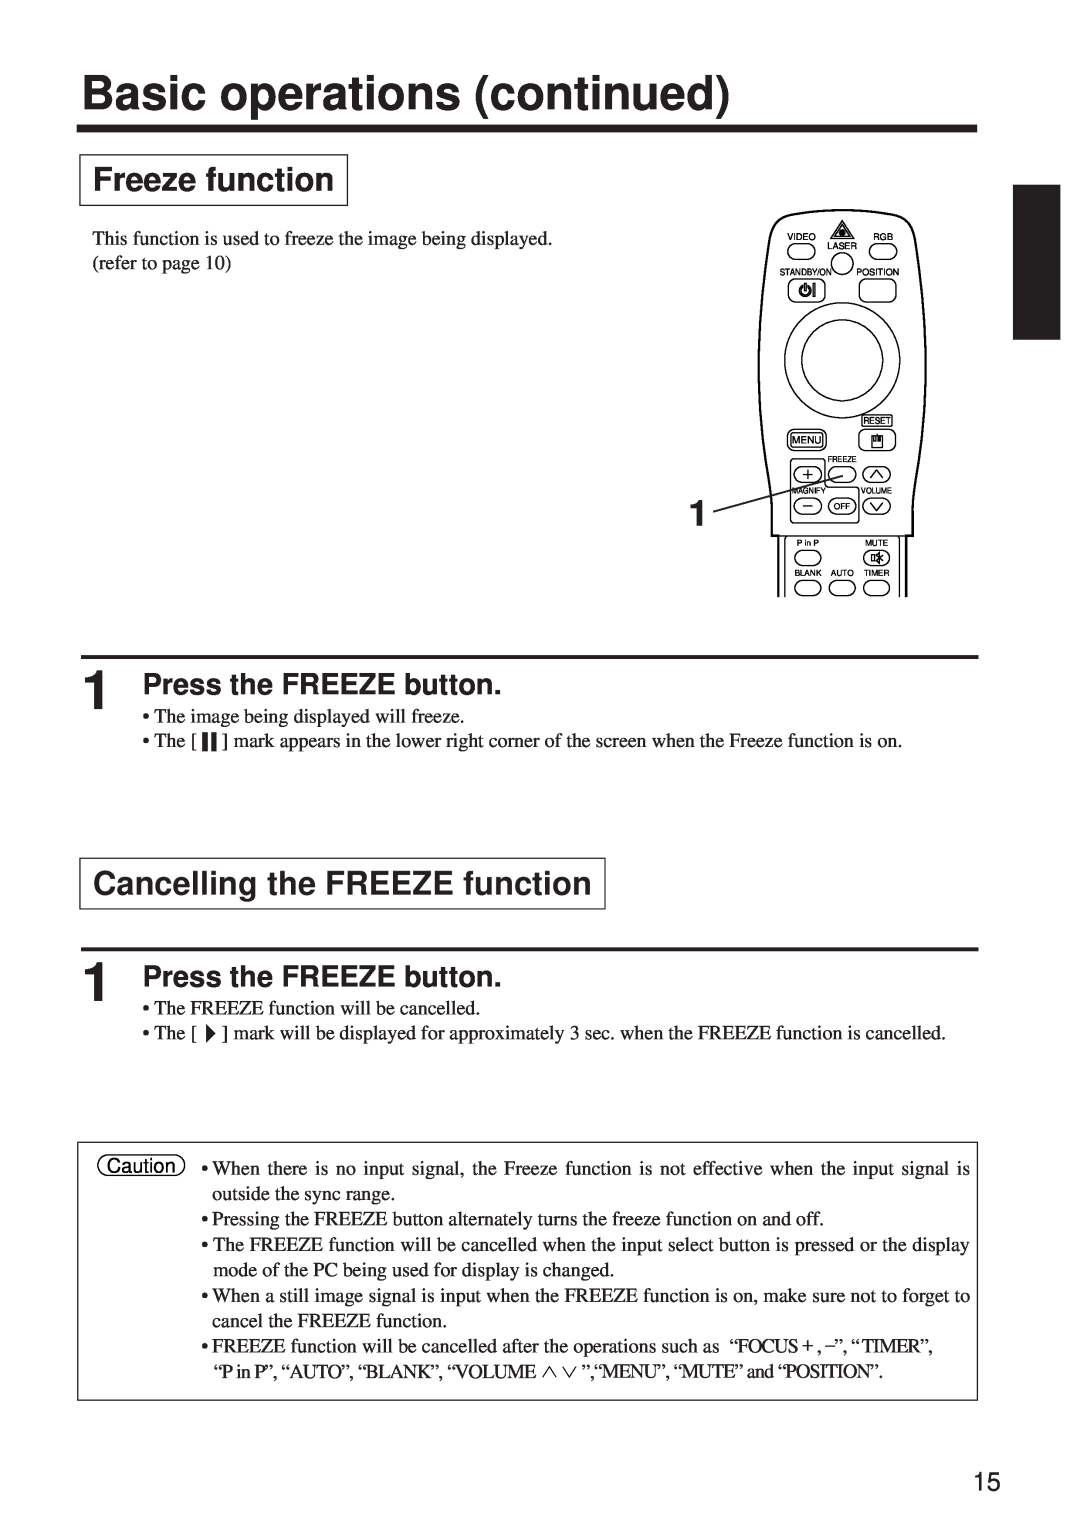 BOXLIGHT MP-650i Freeze function, Cancelling the FREEZE function, Press the FREEZE button, Basic operations continued 